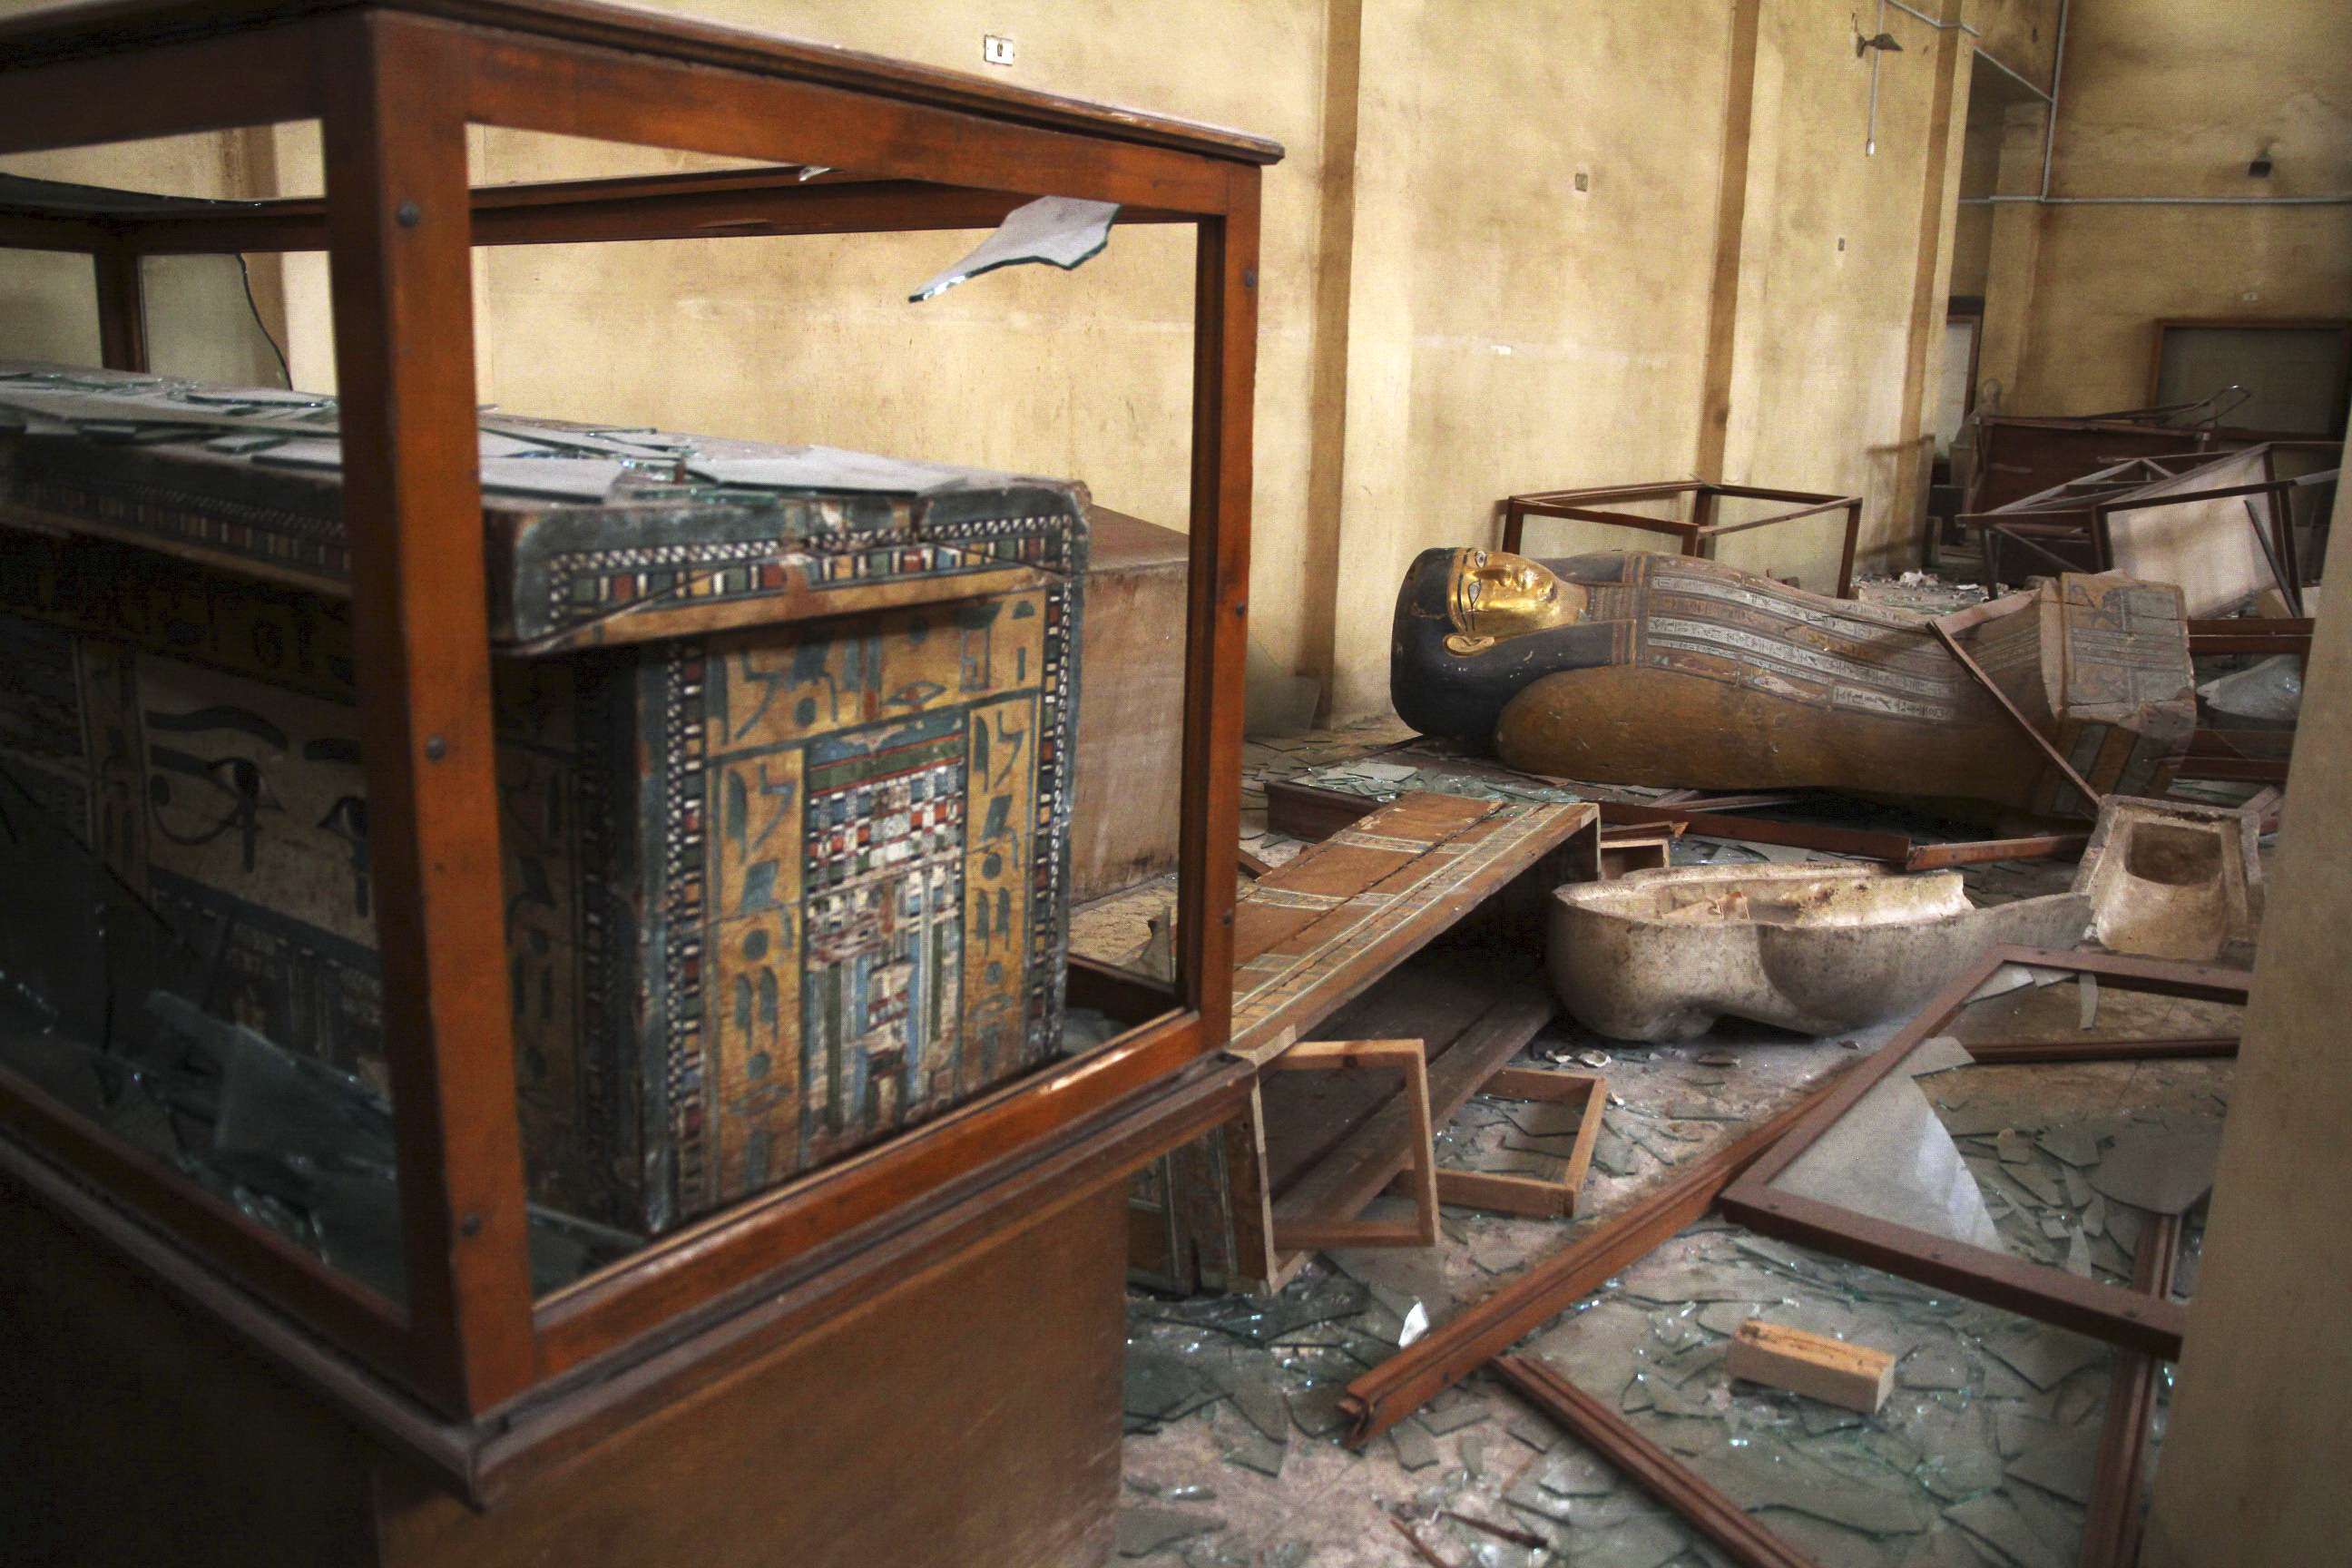 Malawi Museum after being looted in August 2013.